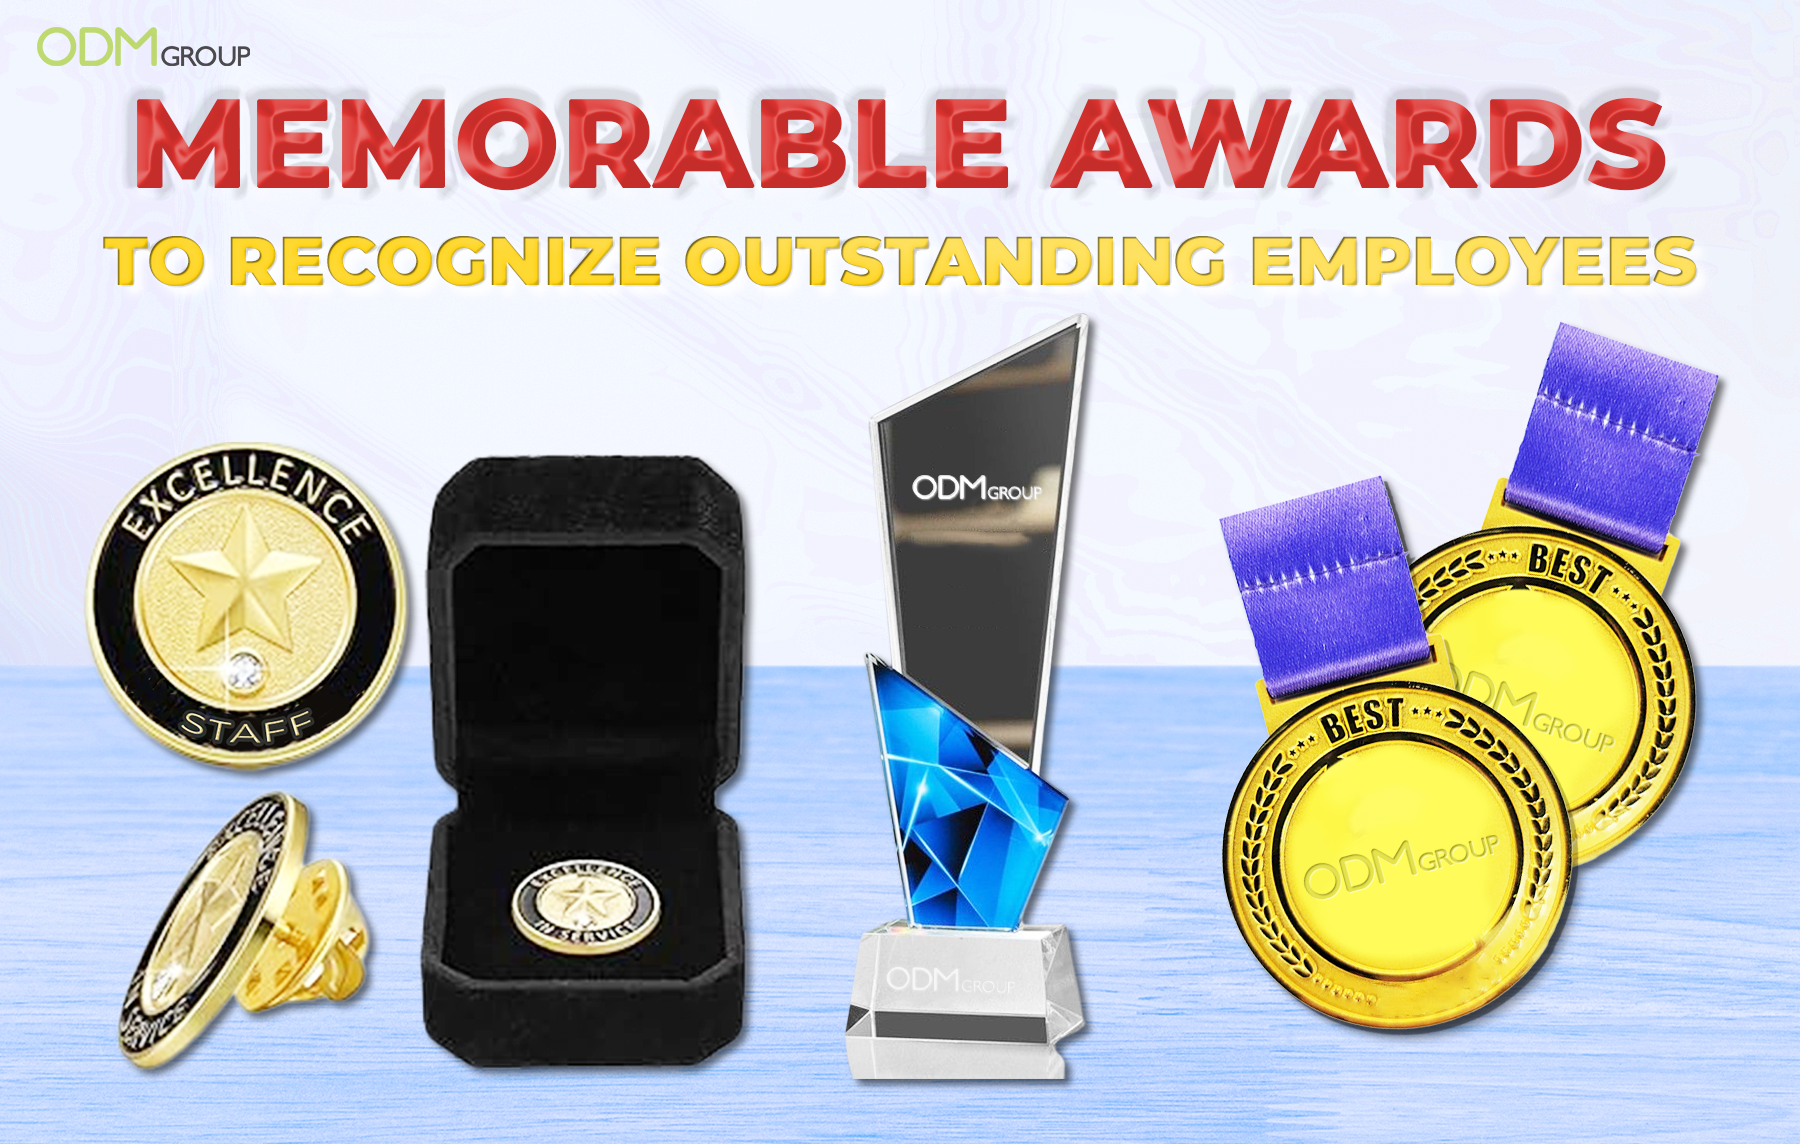 Custom awards and medals designed to recognize outstanding employees - Ideas for Employee Appreciation Day